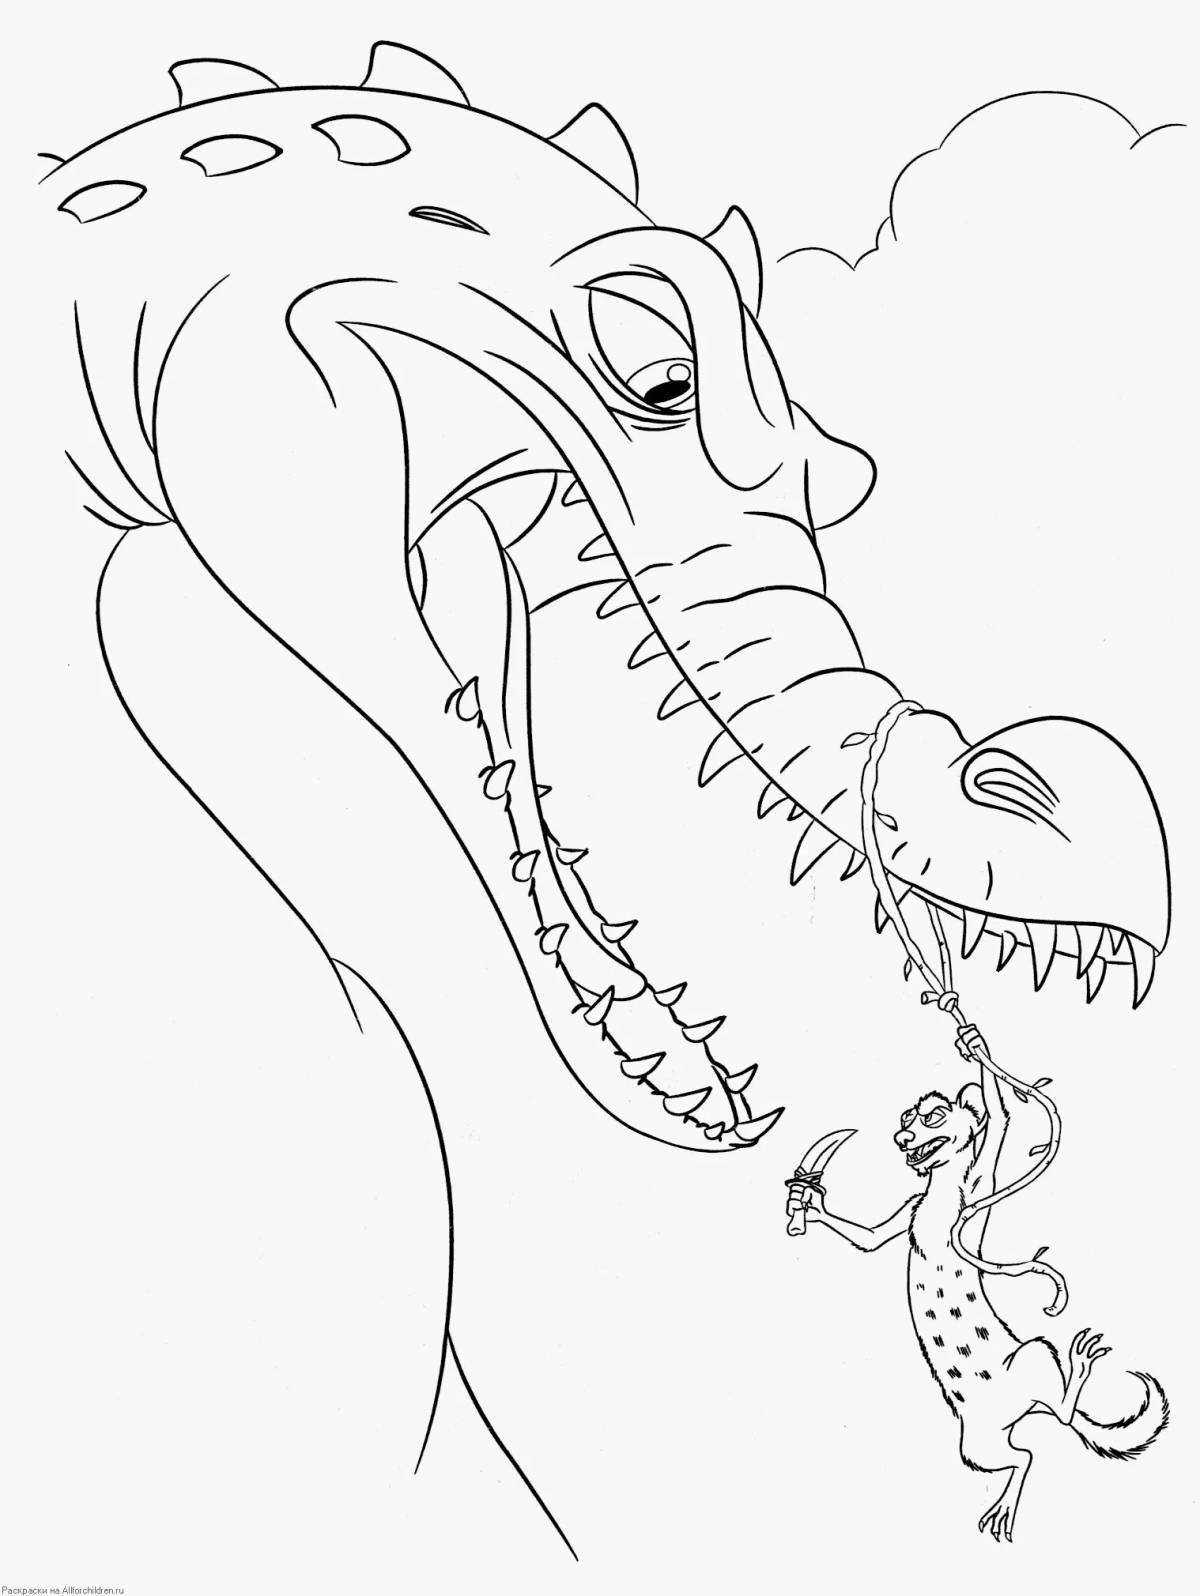 Colourful ice age dinosaur coloring book